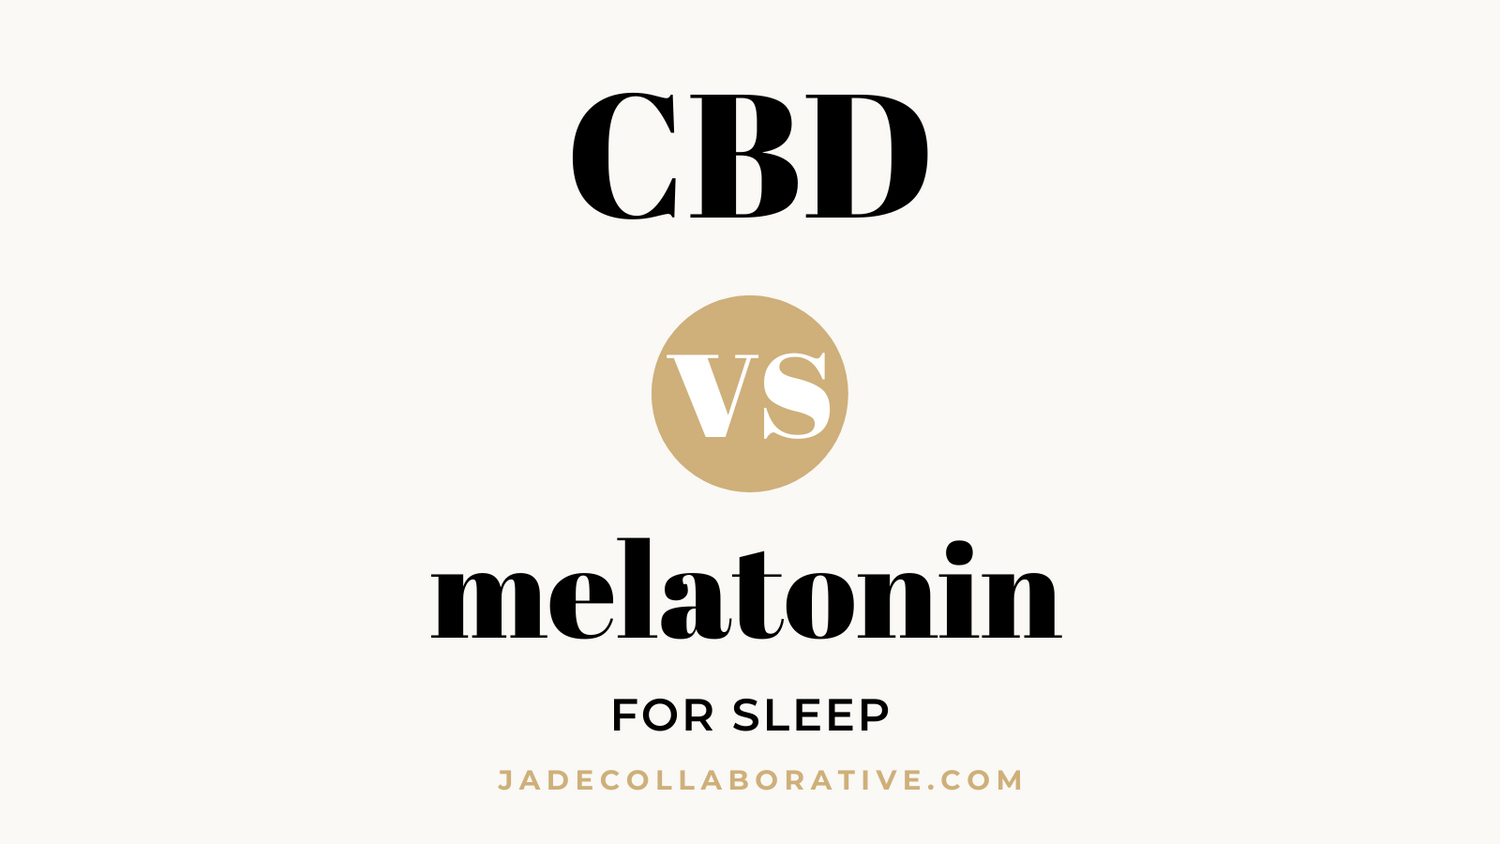 CBD vs melatonin for sleep - a comparison guide with pros & cons by Jade Collaborative